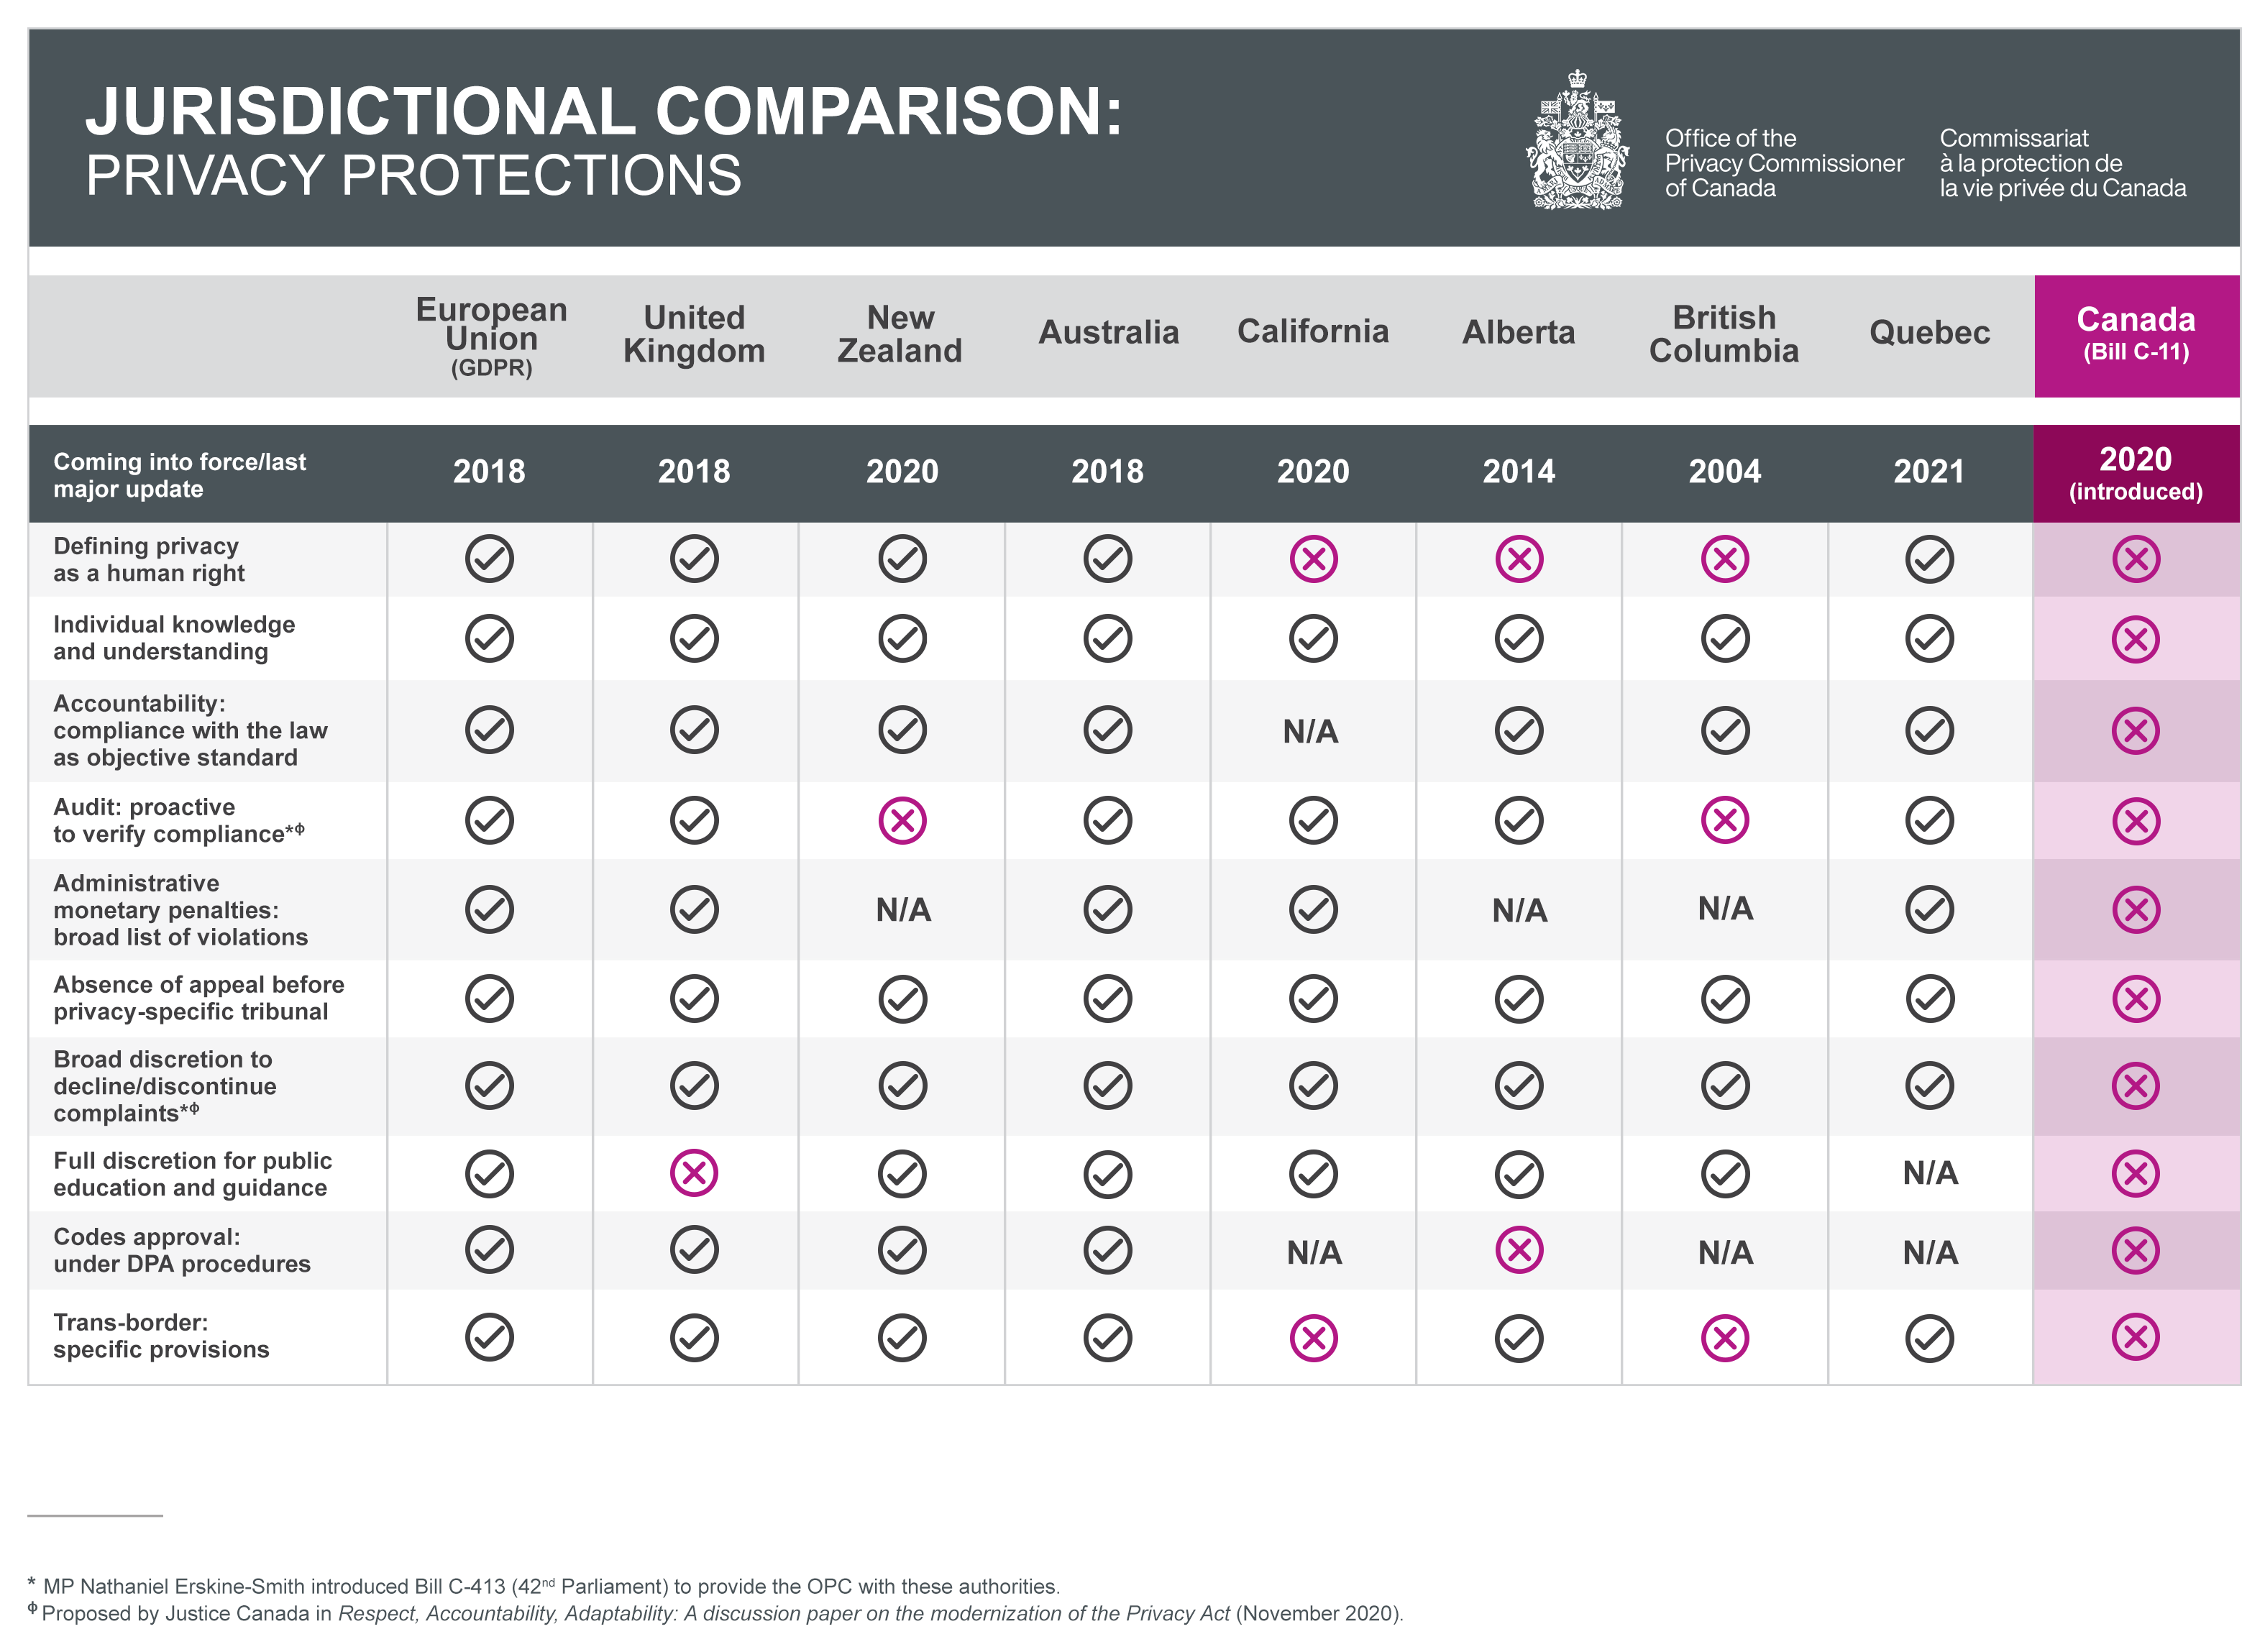 Figure 1: Jurisdictional comparison: Privacy protections: see text version.